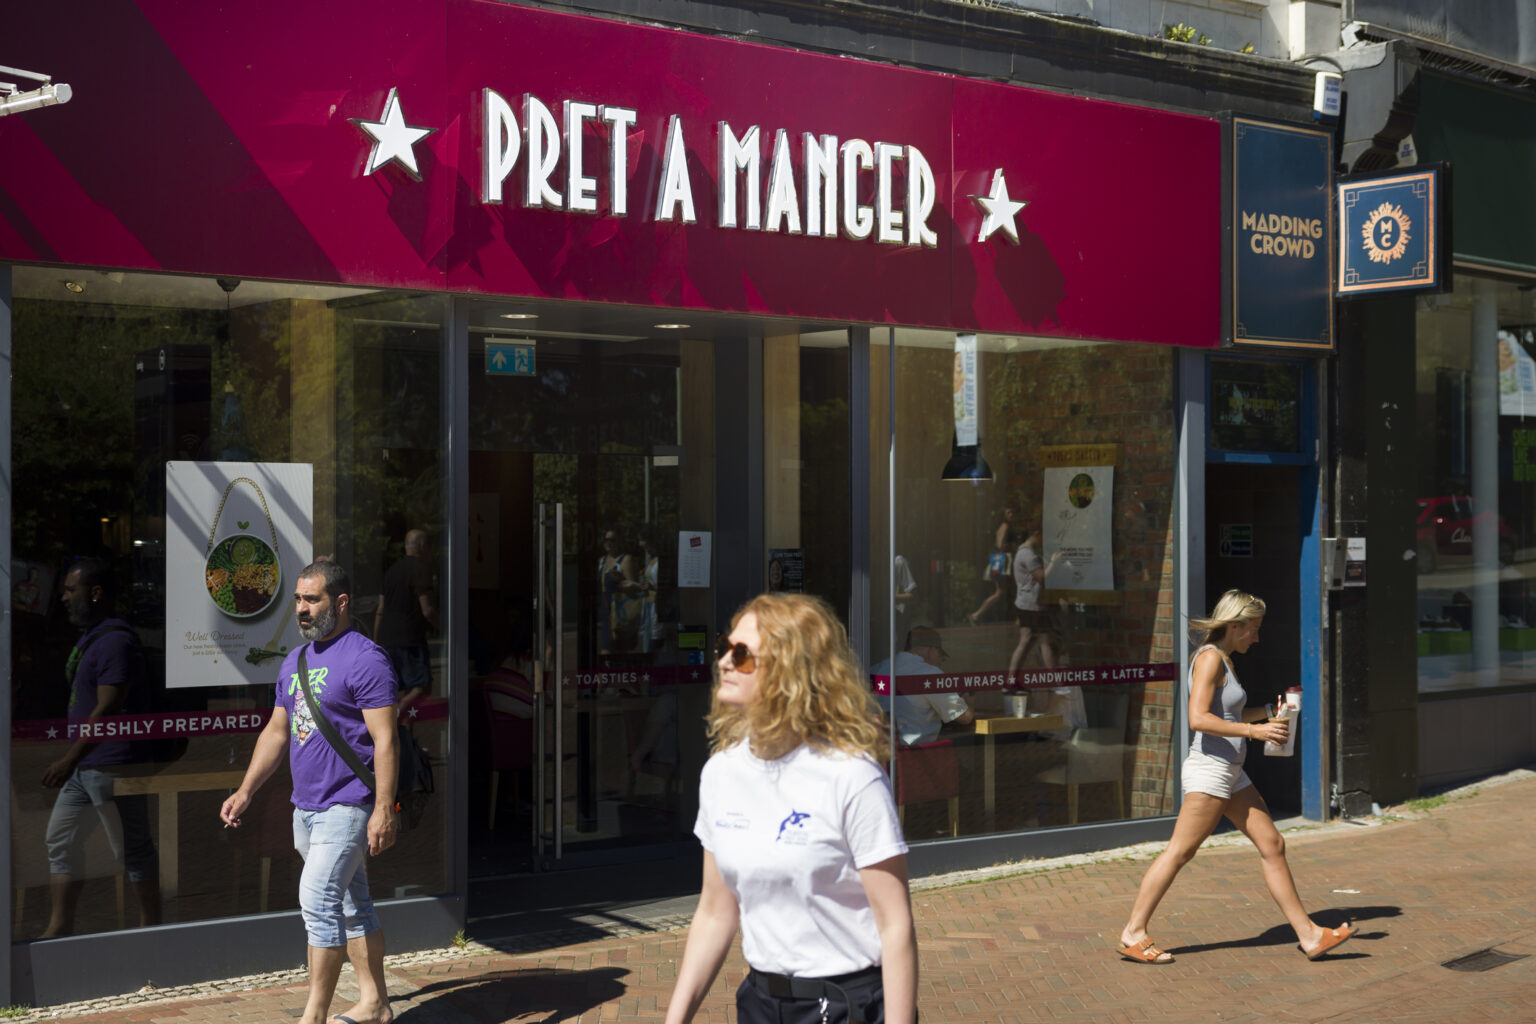 How to sign up for the Pret a Manger subscription service and does it include unlimited coffee?